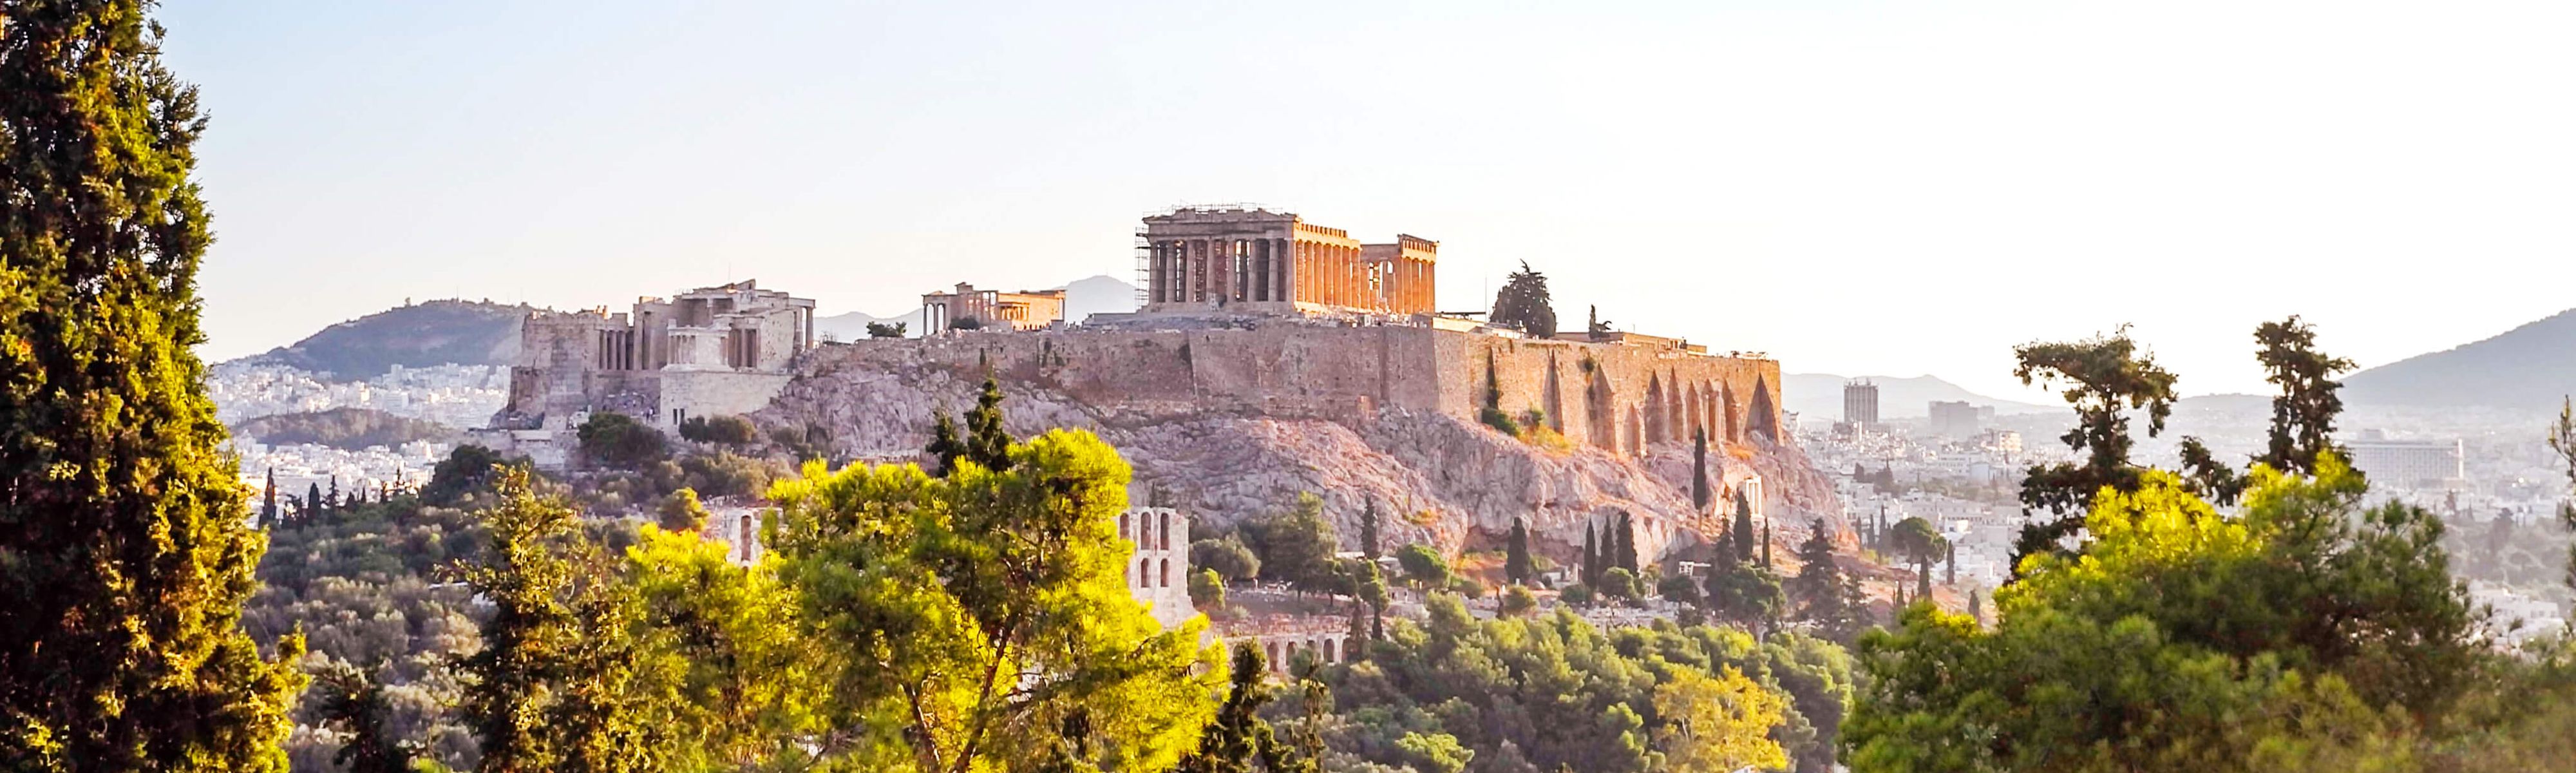 acropolis at sunrise in athens greece